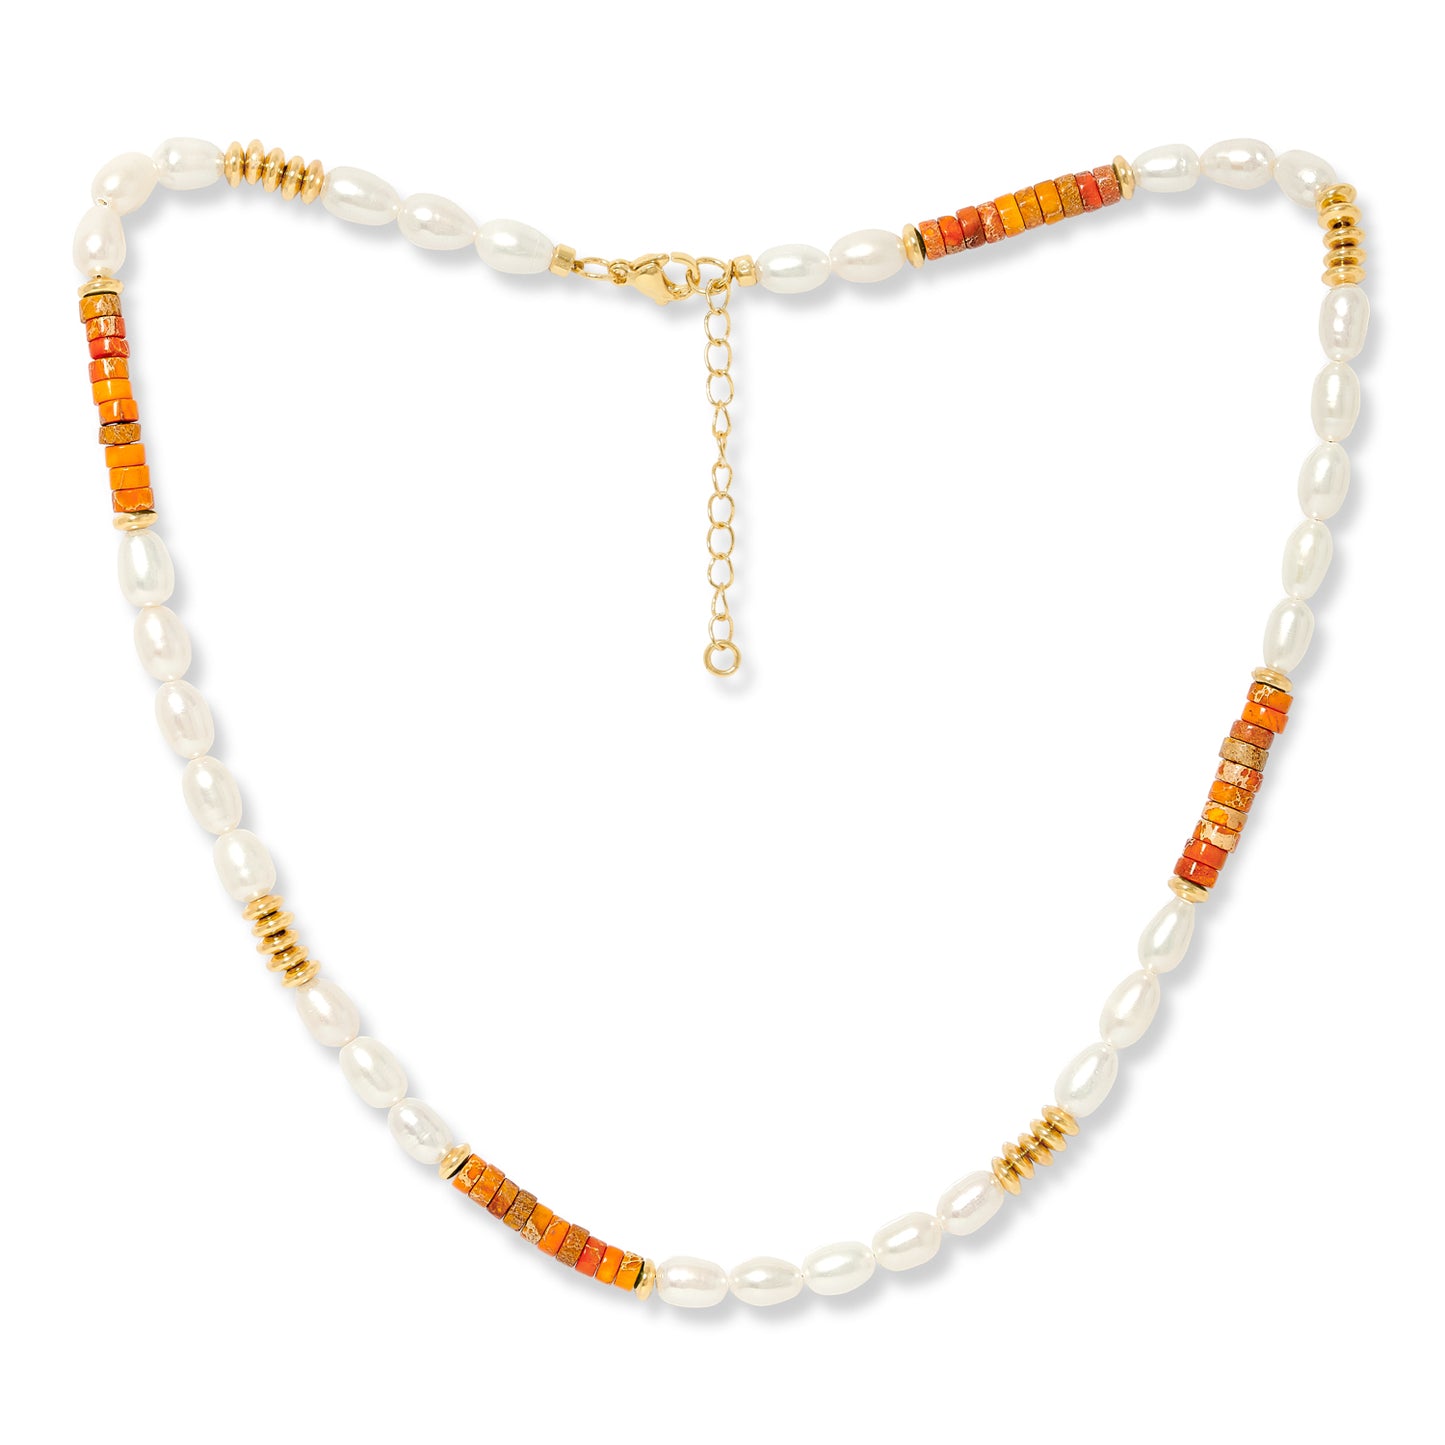 Nova oval cultured freshwater pearl necklace with orange jasper & gold beads